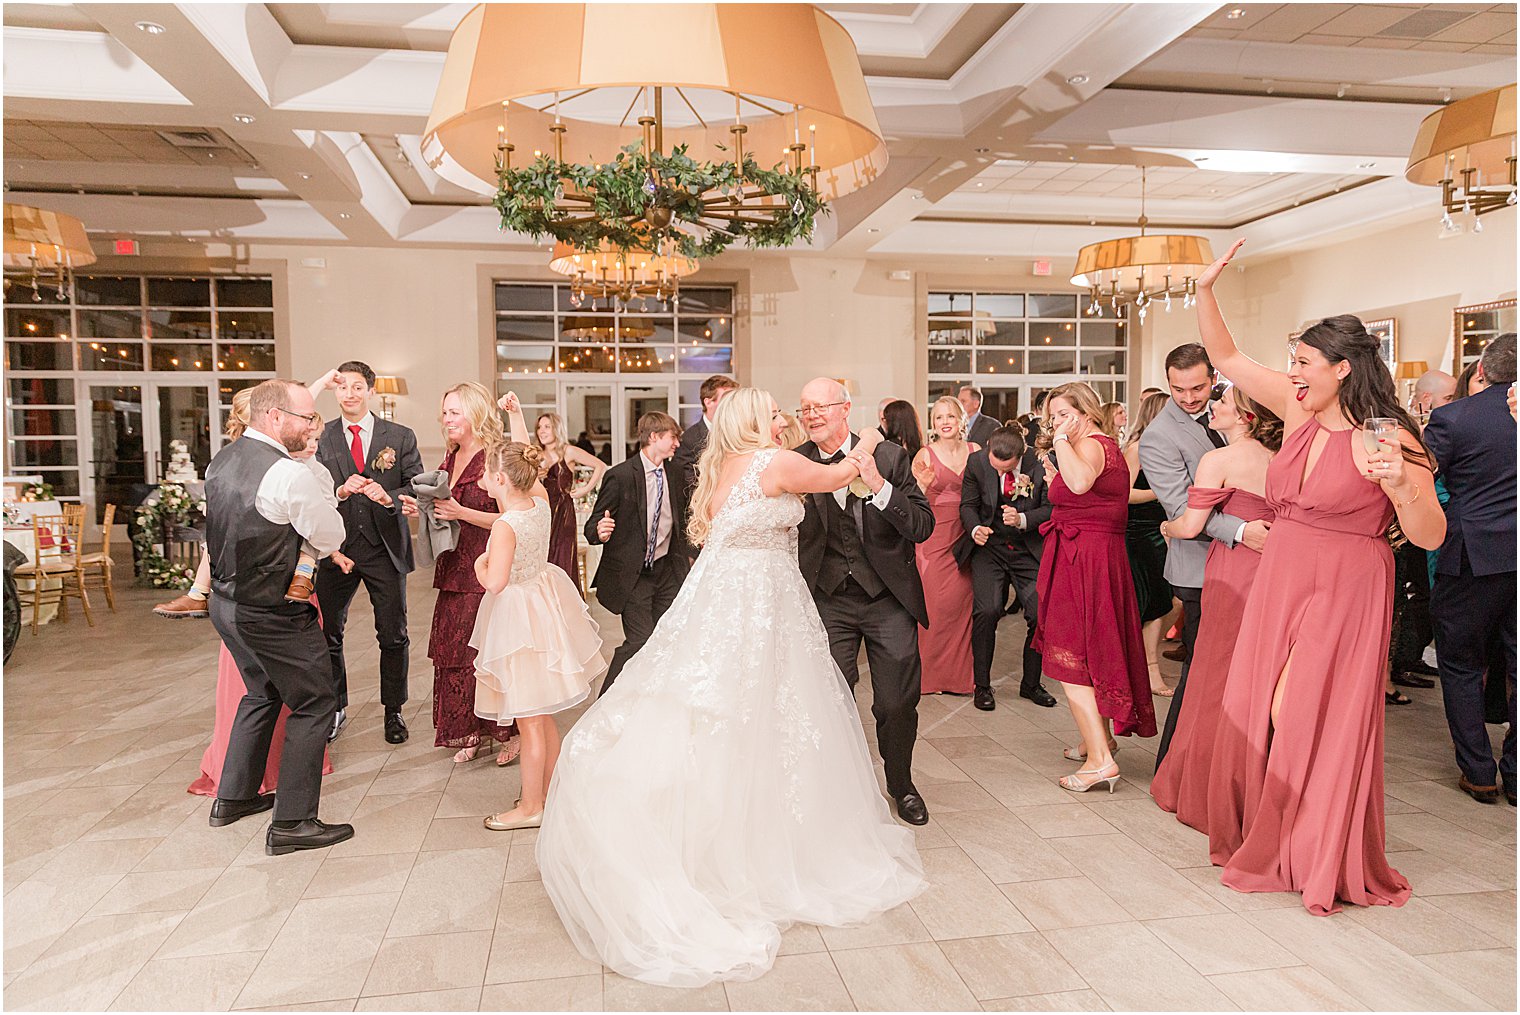 newlyweds dances with guests during Warren NJ wedding reception